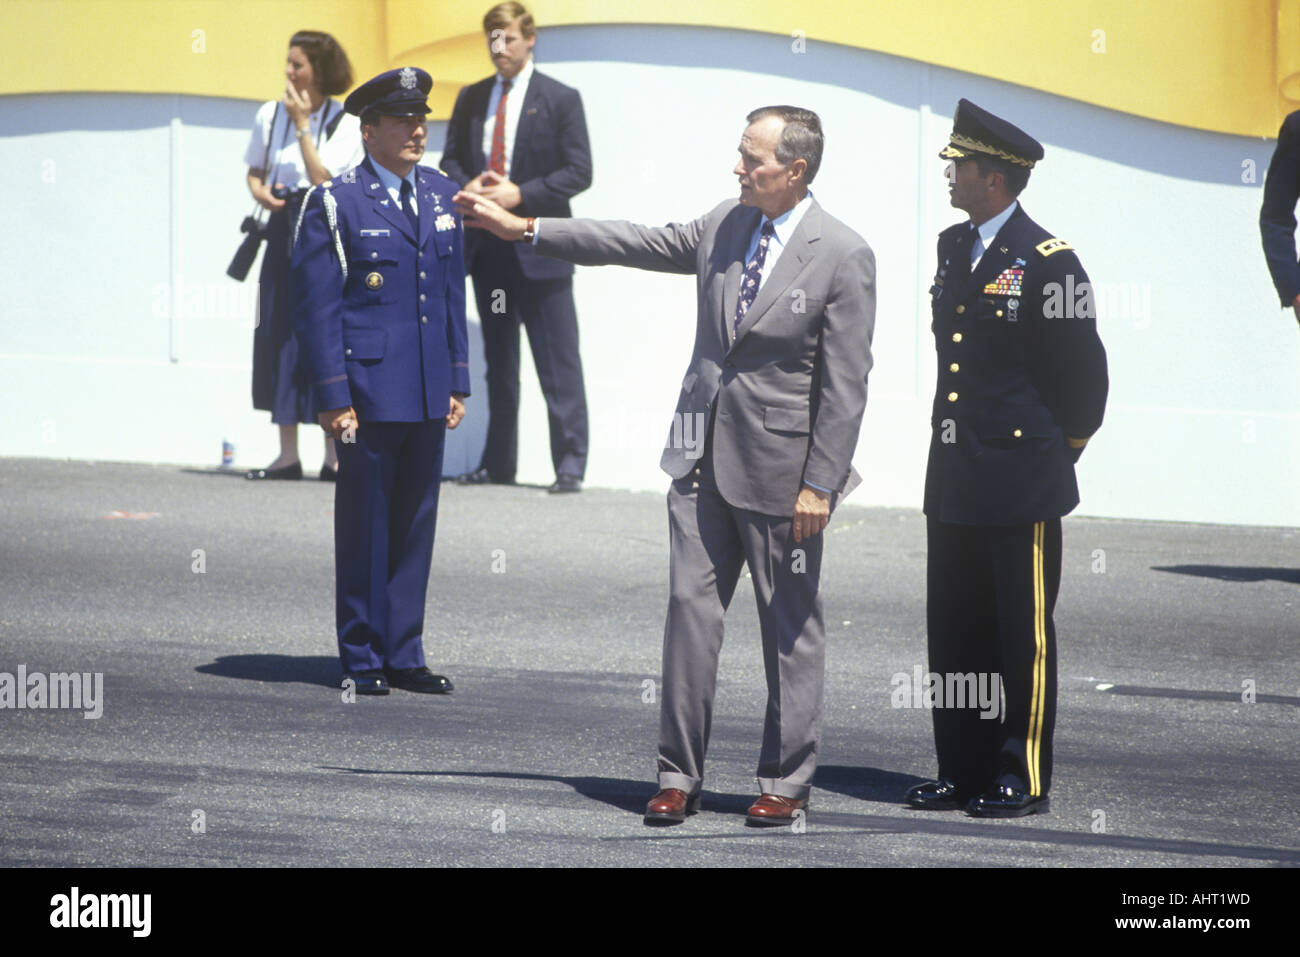 President Bush stands near the Presidential viewing booth with military officers during the Desert Storm Victory Parade in Stock Photo